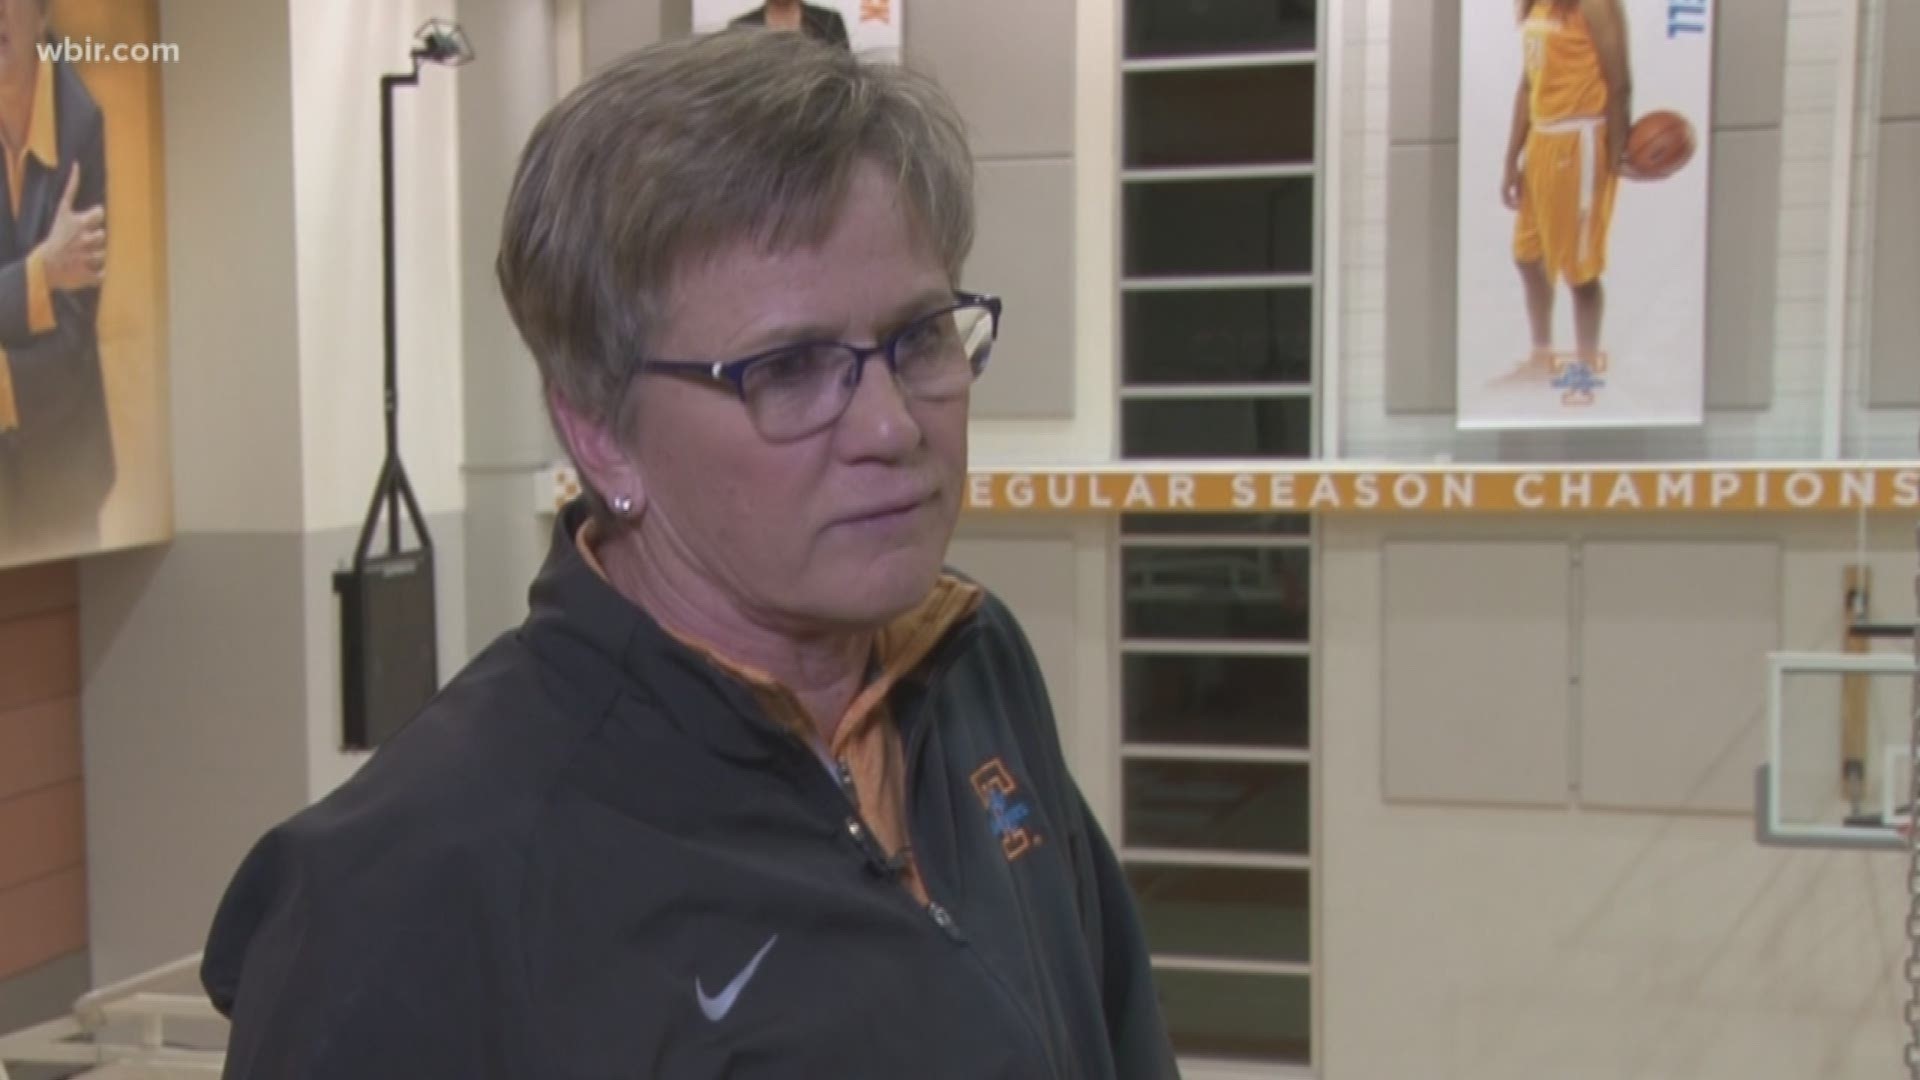 Feb. 5, 2018: Lady Vols Coach Holly Warlick answered your questions in a Facebook live 10Chat interview.